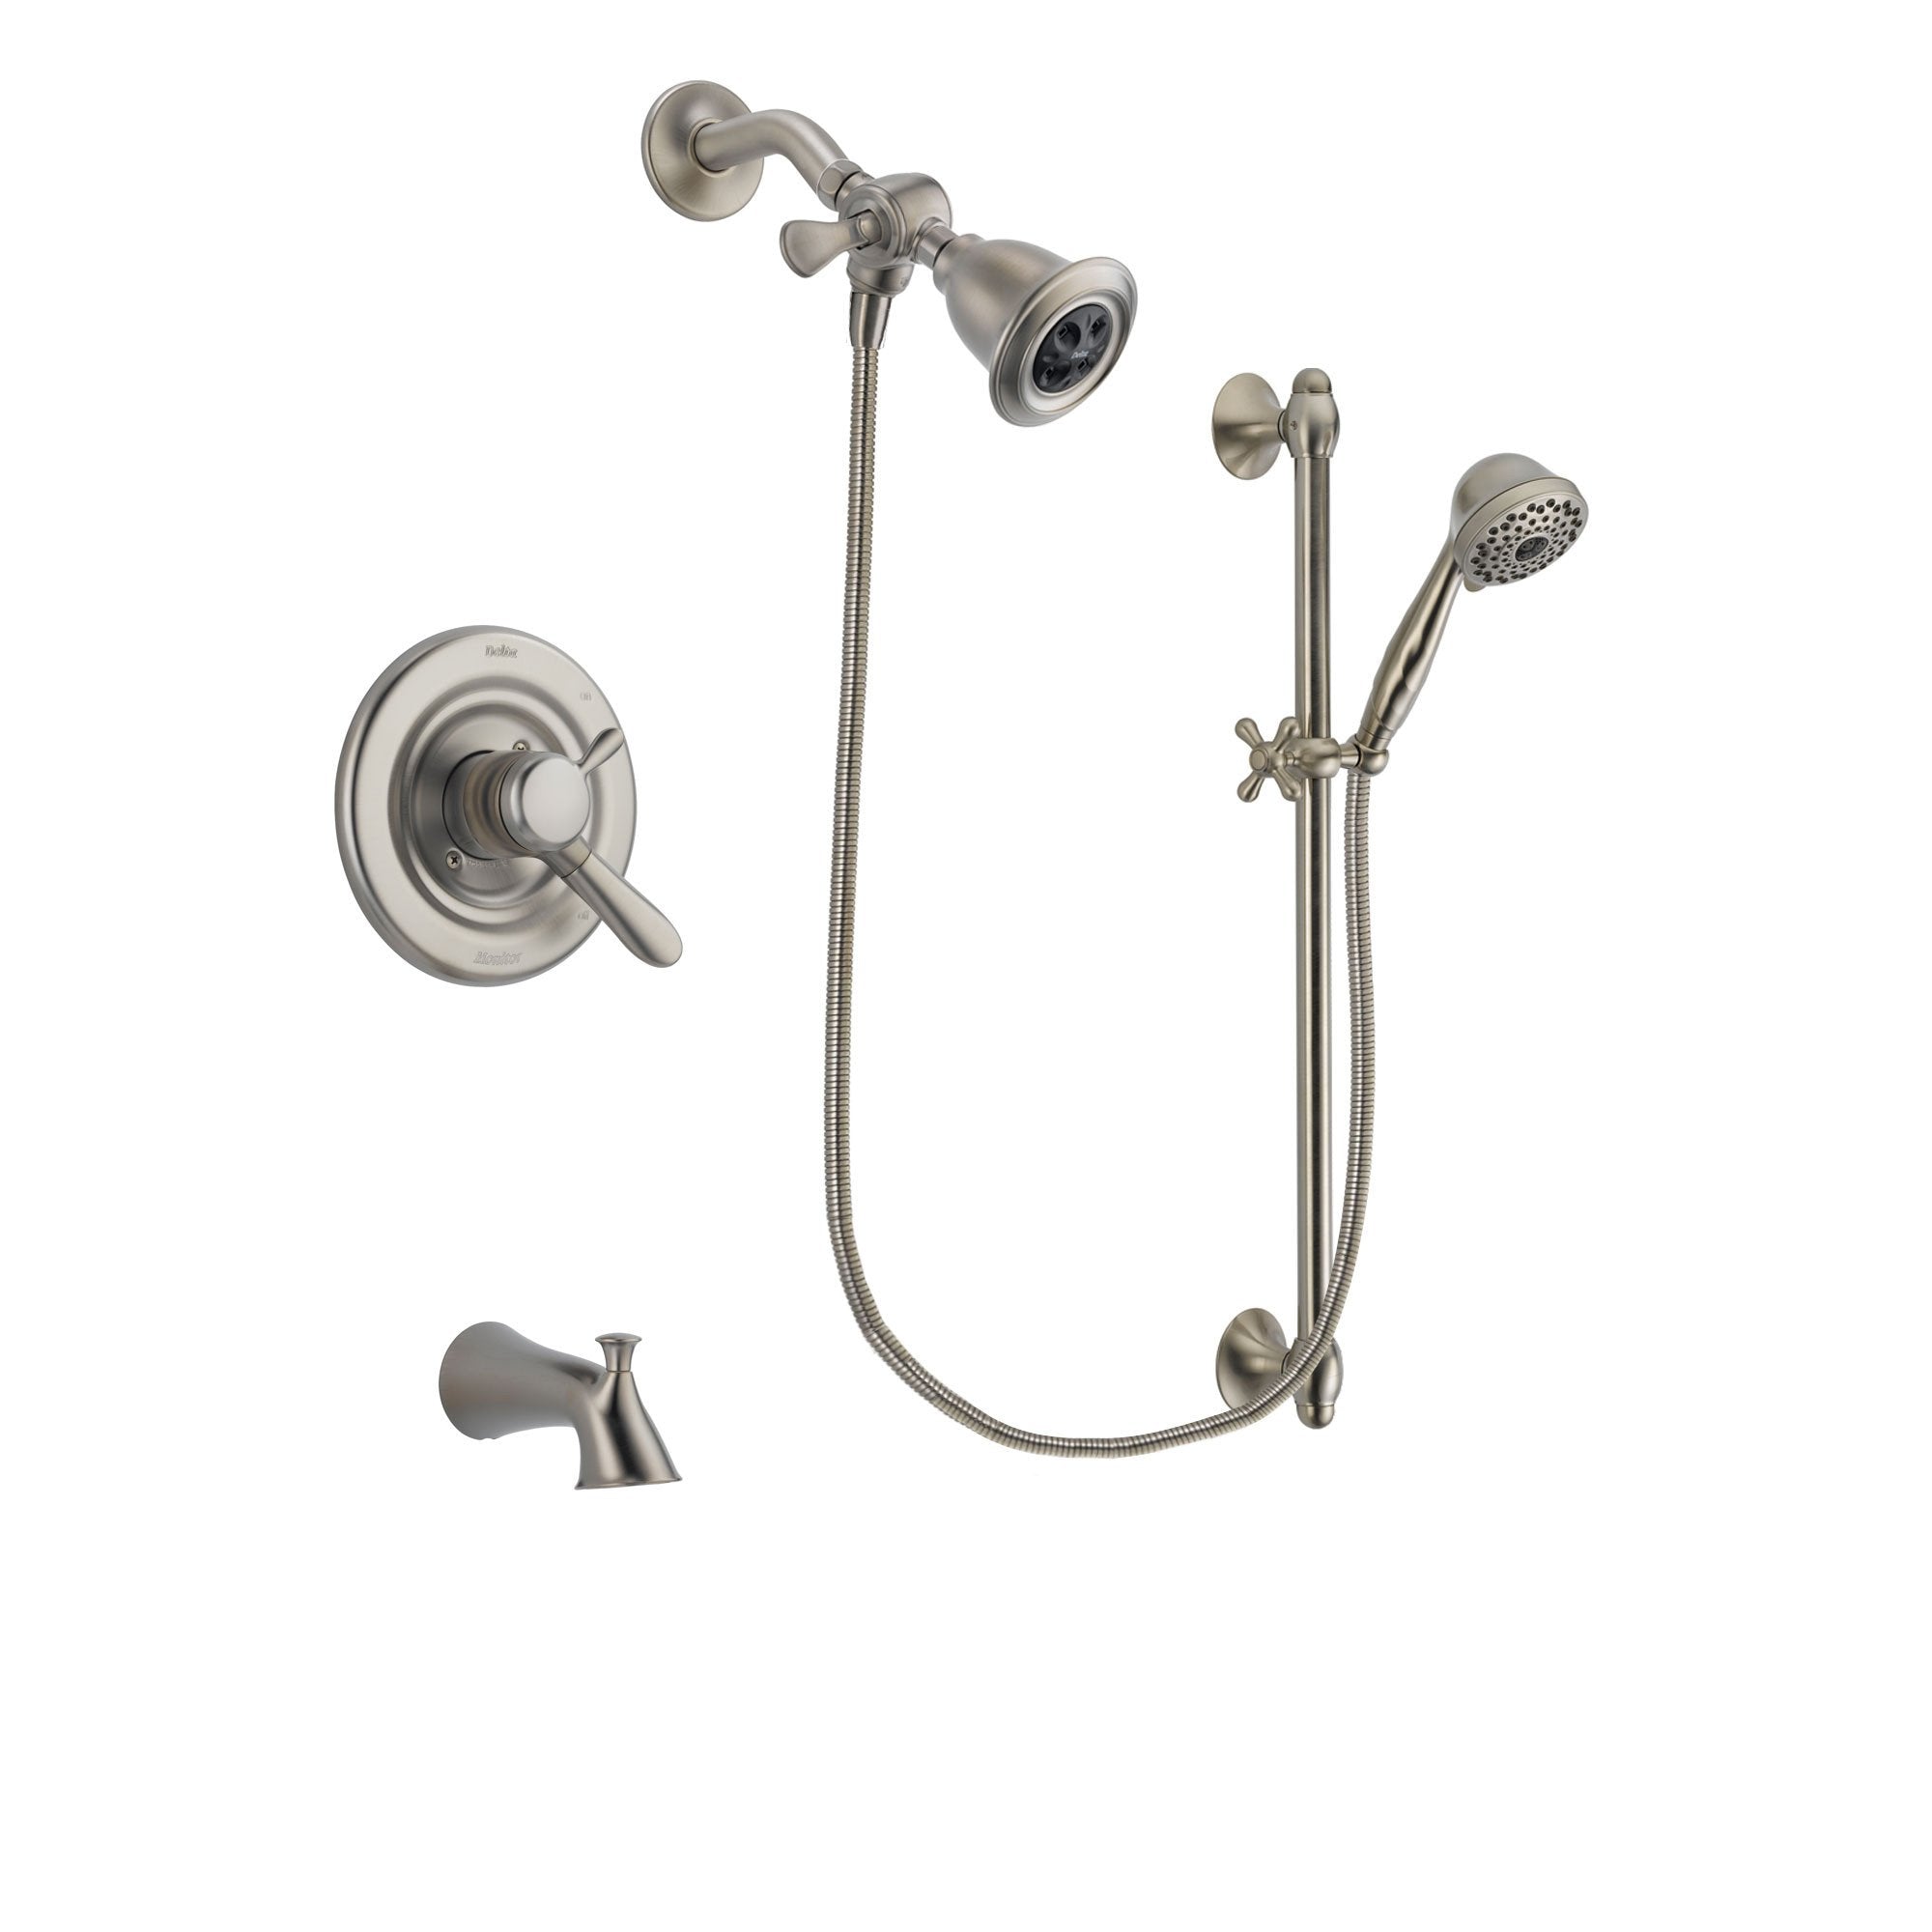 Delta Lahara Stainless Steel Finish Dual Control Tub and Shower Faucet System Package with Water Efficient Showerhead and 7-Spray Handheld Shower with Slide Bar Includes Rough-in Valve and Tub Spout DSP1703V